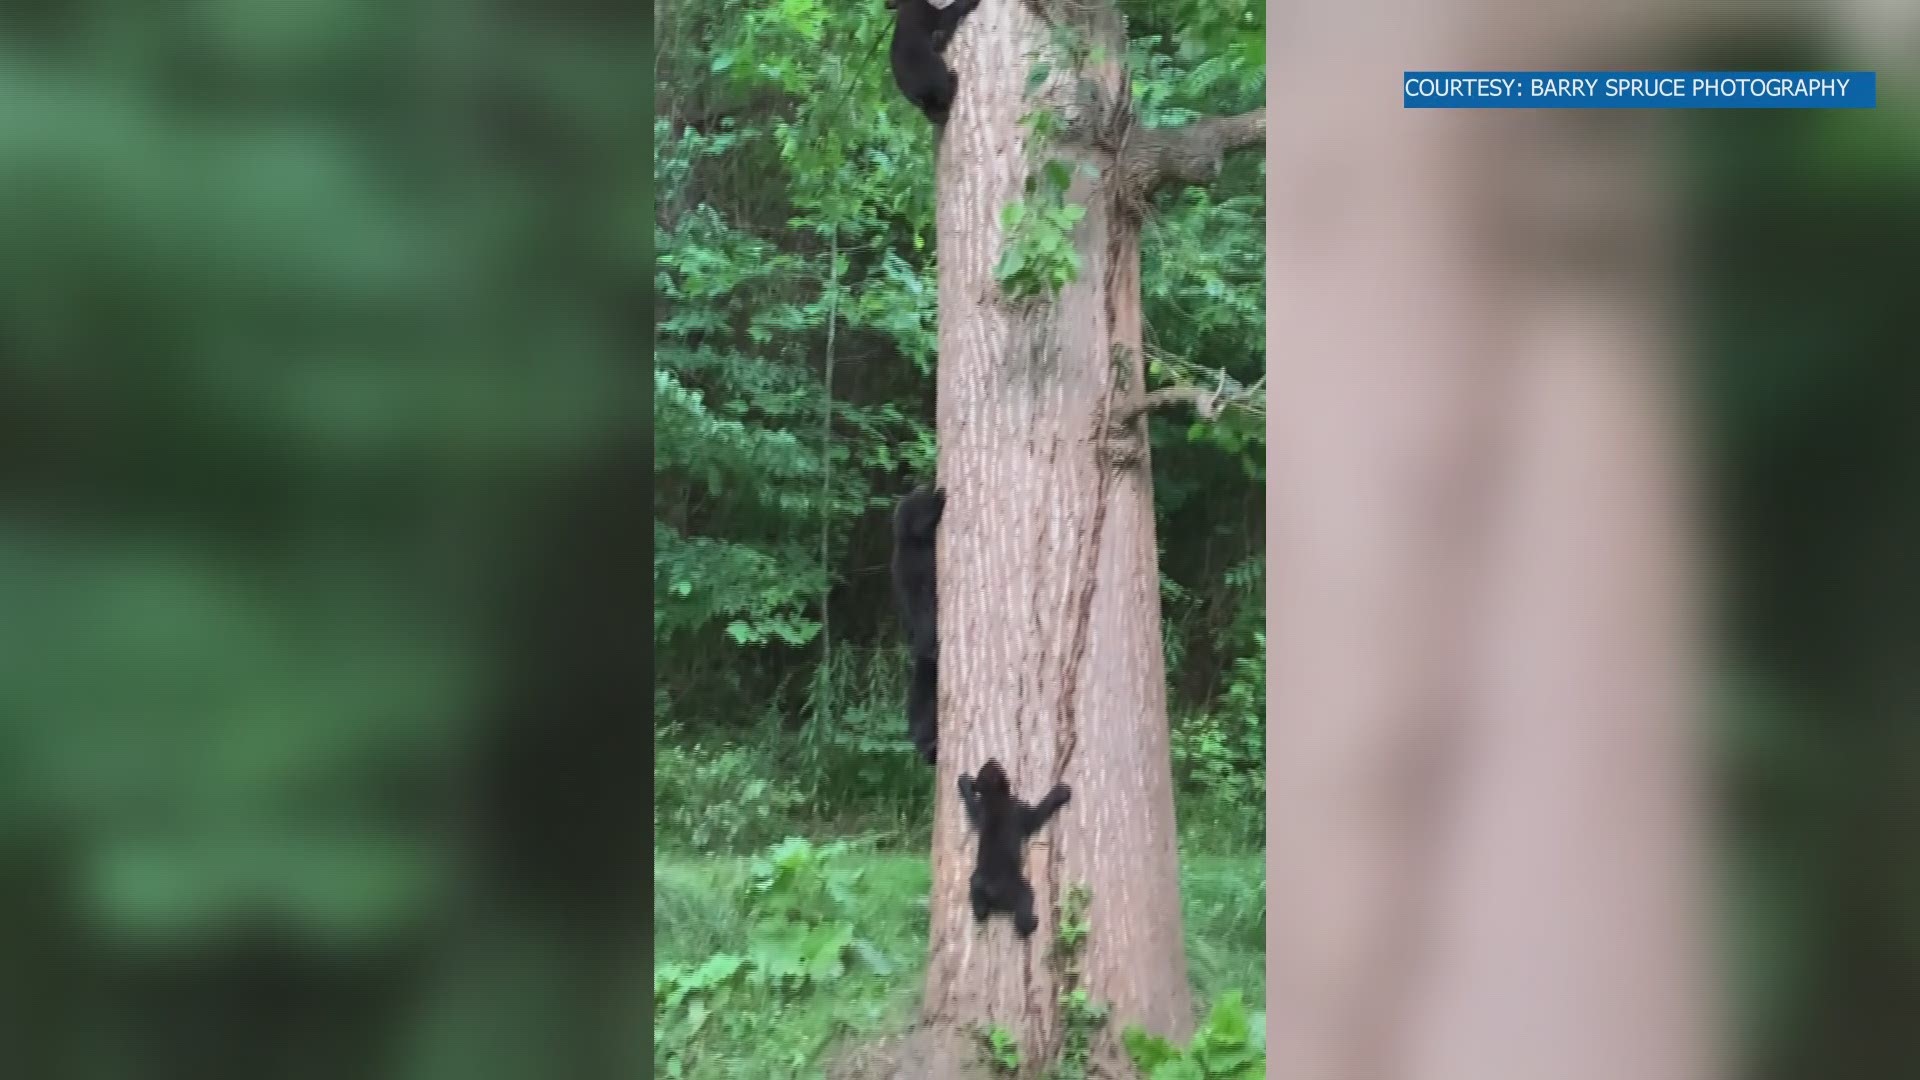 Photographer Barry Spruce spotted a mother bear with 5 cubs in the North Carolina mountains. Bears usually have 2-3 cubs.